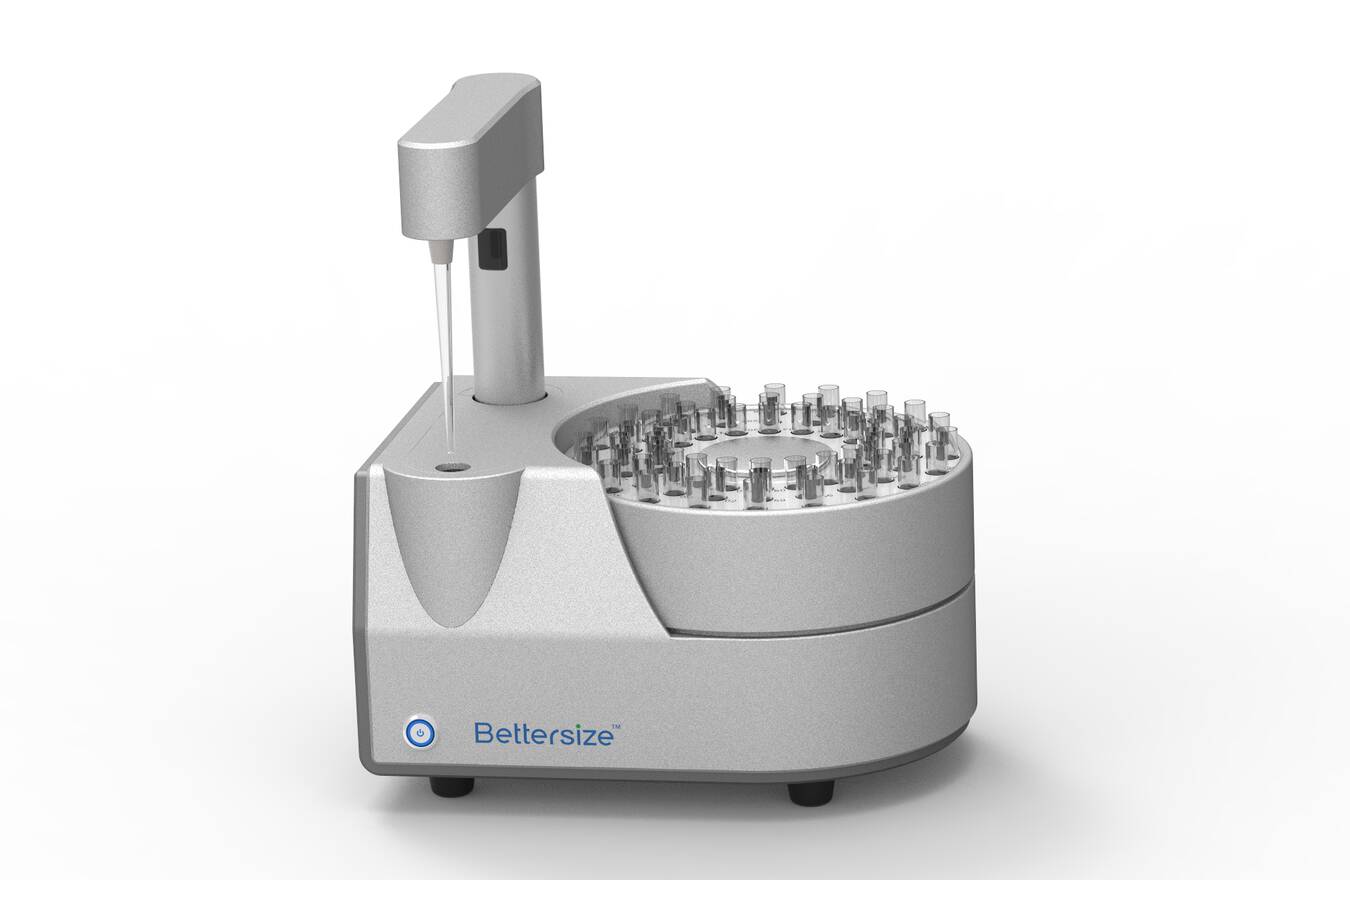 The autosampler from Bettersize